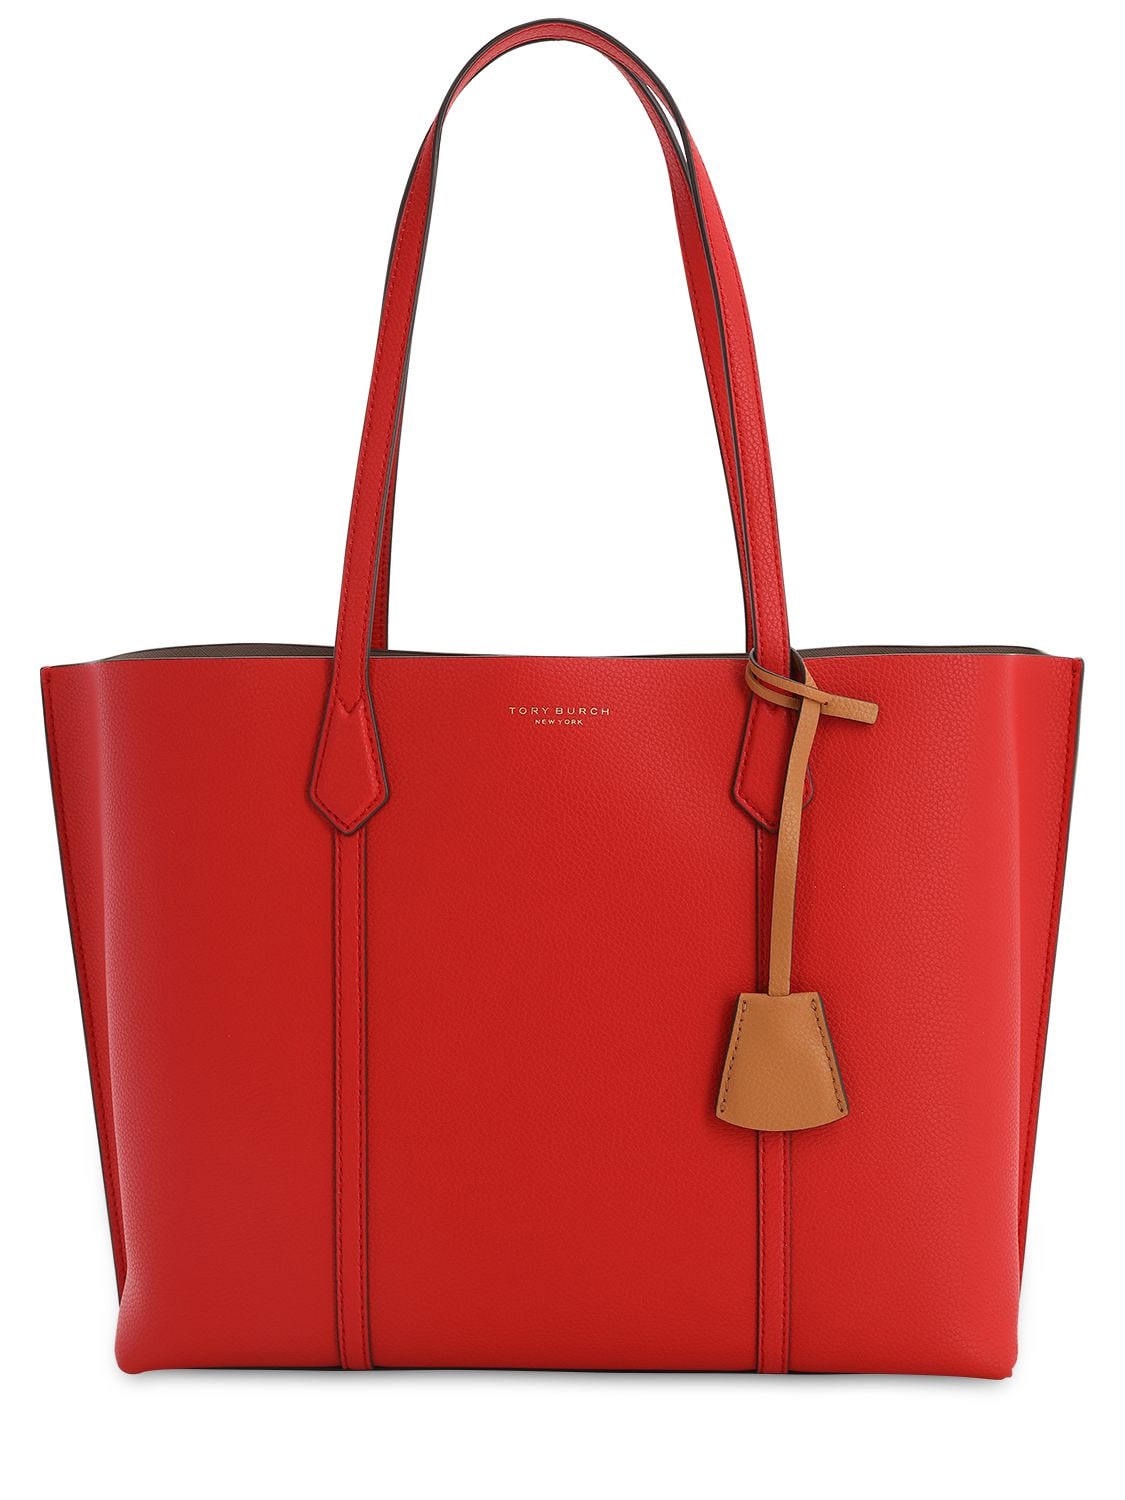 Tory Burch Perry Multicolor Leather Tote Bag In Red